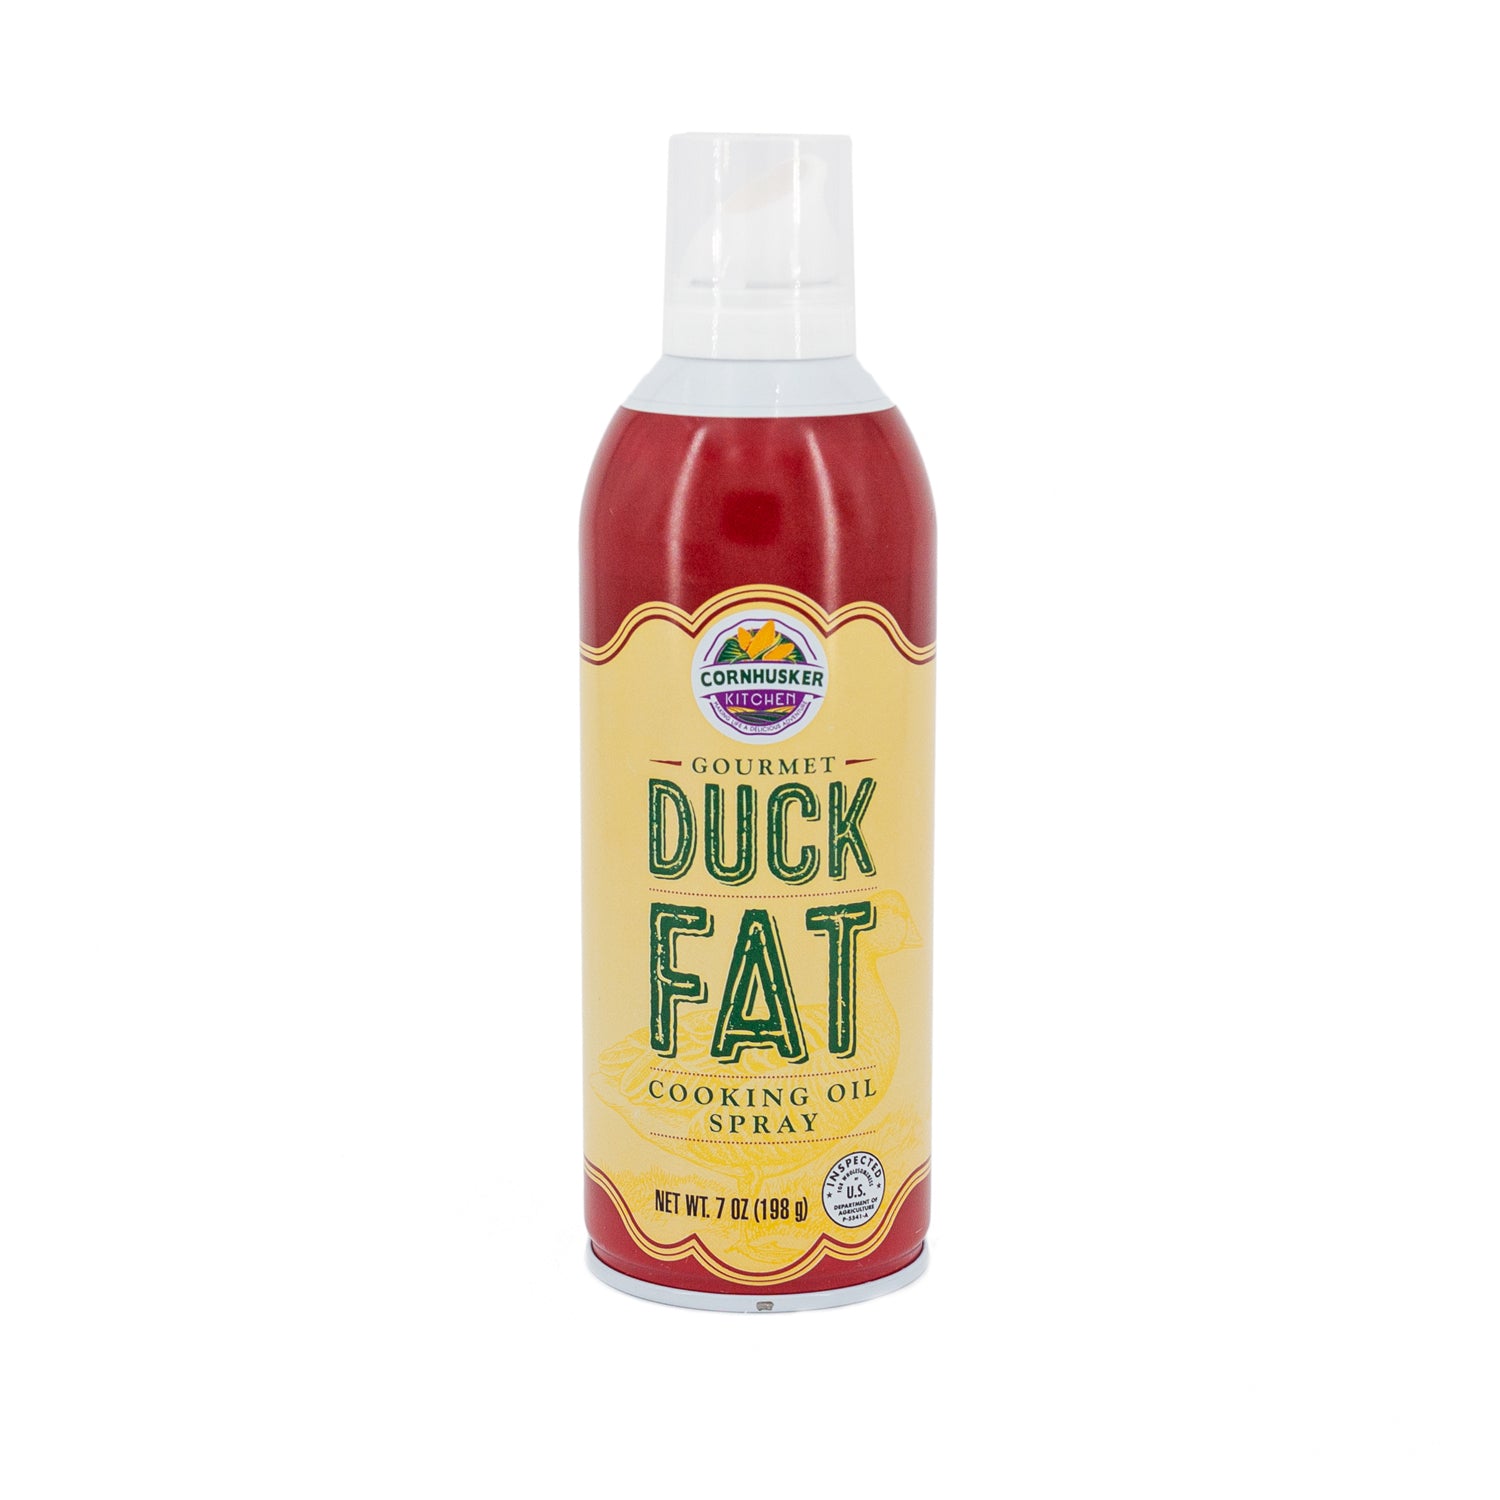 Duck Fat spray can